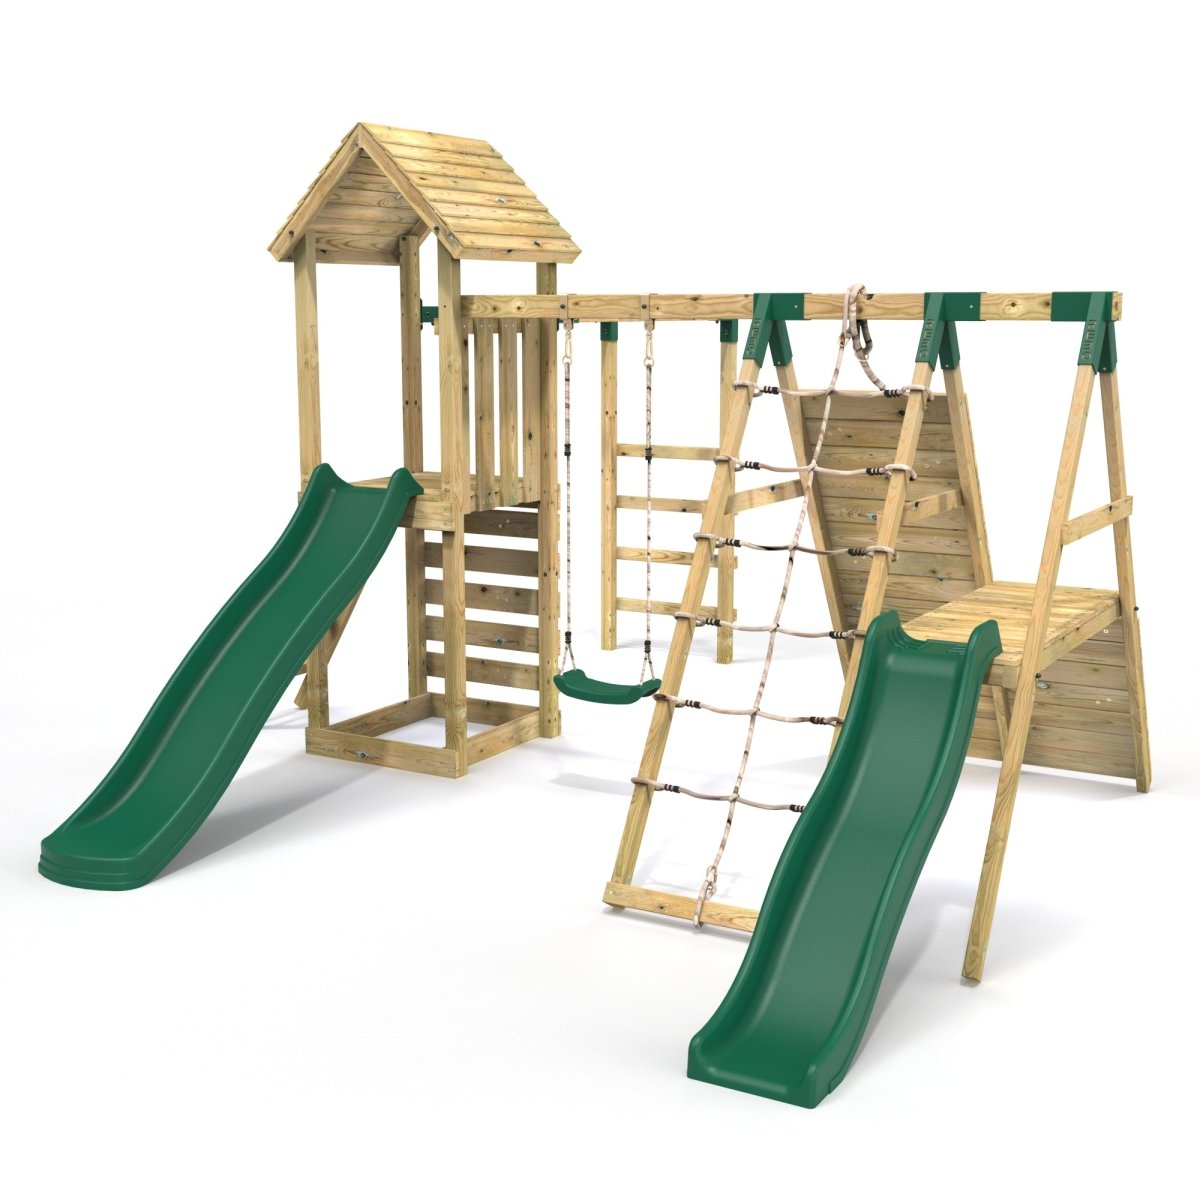 Rebo Wooden Climbing Frame with Swings, 2 Slides, Up & over Climbing wall and Monkey Bars - Brecon